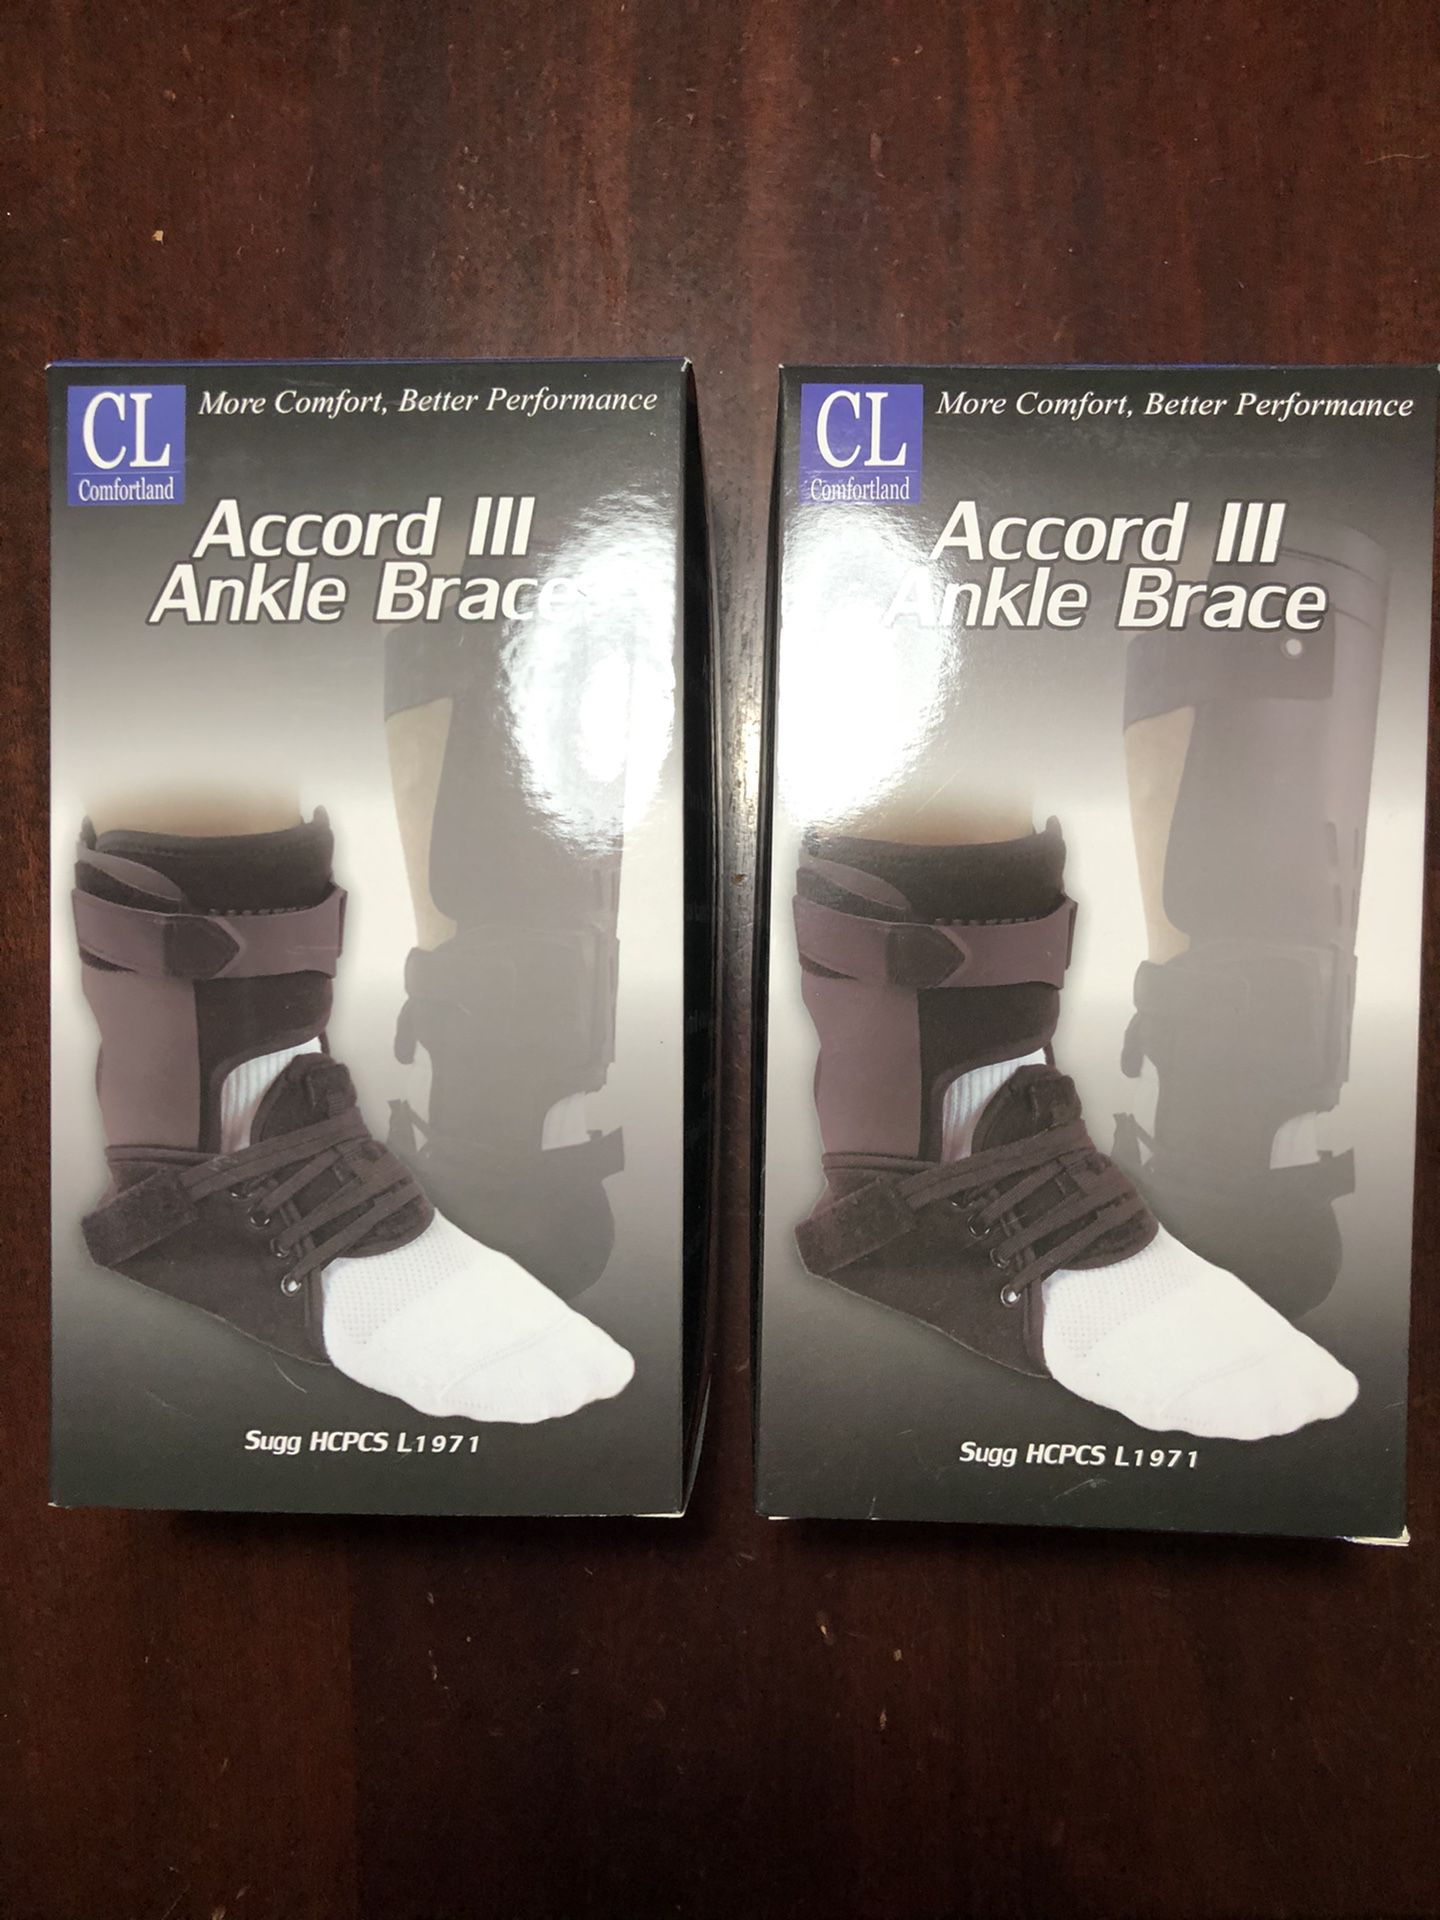 2 ankle foot support braces adjustable brand new in box- read labels for use and fitting - see pictures for therapeutic use info Men’s size 8-9